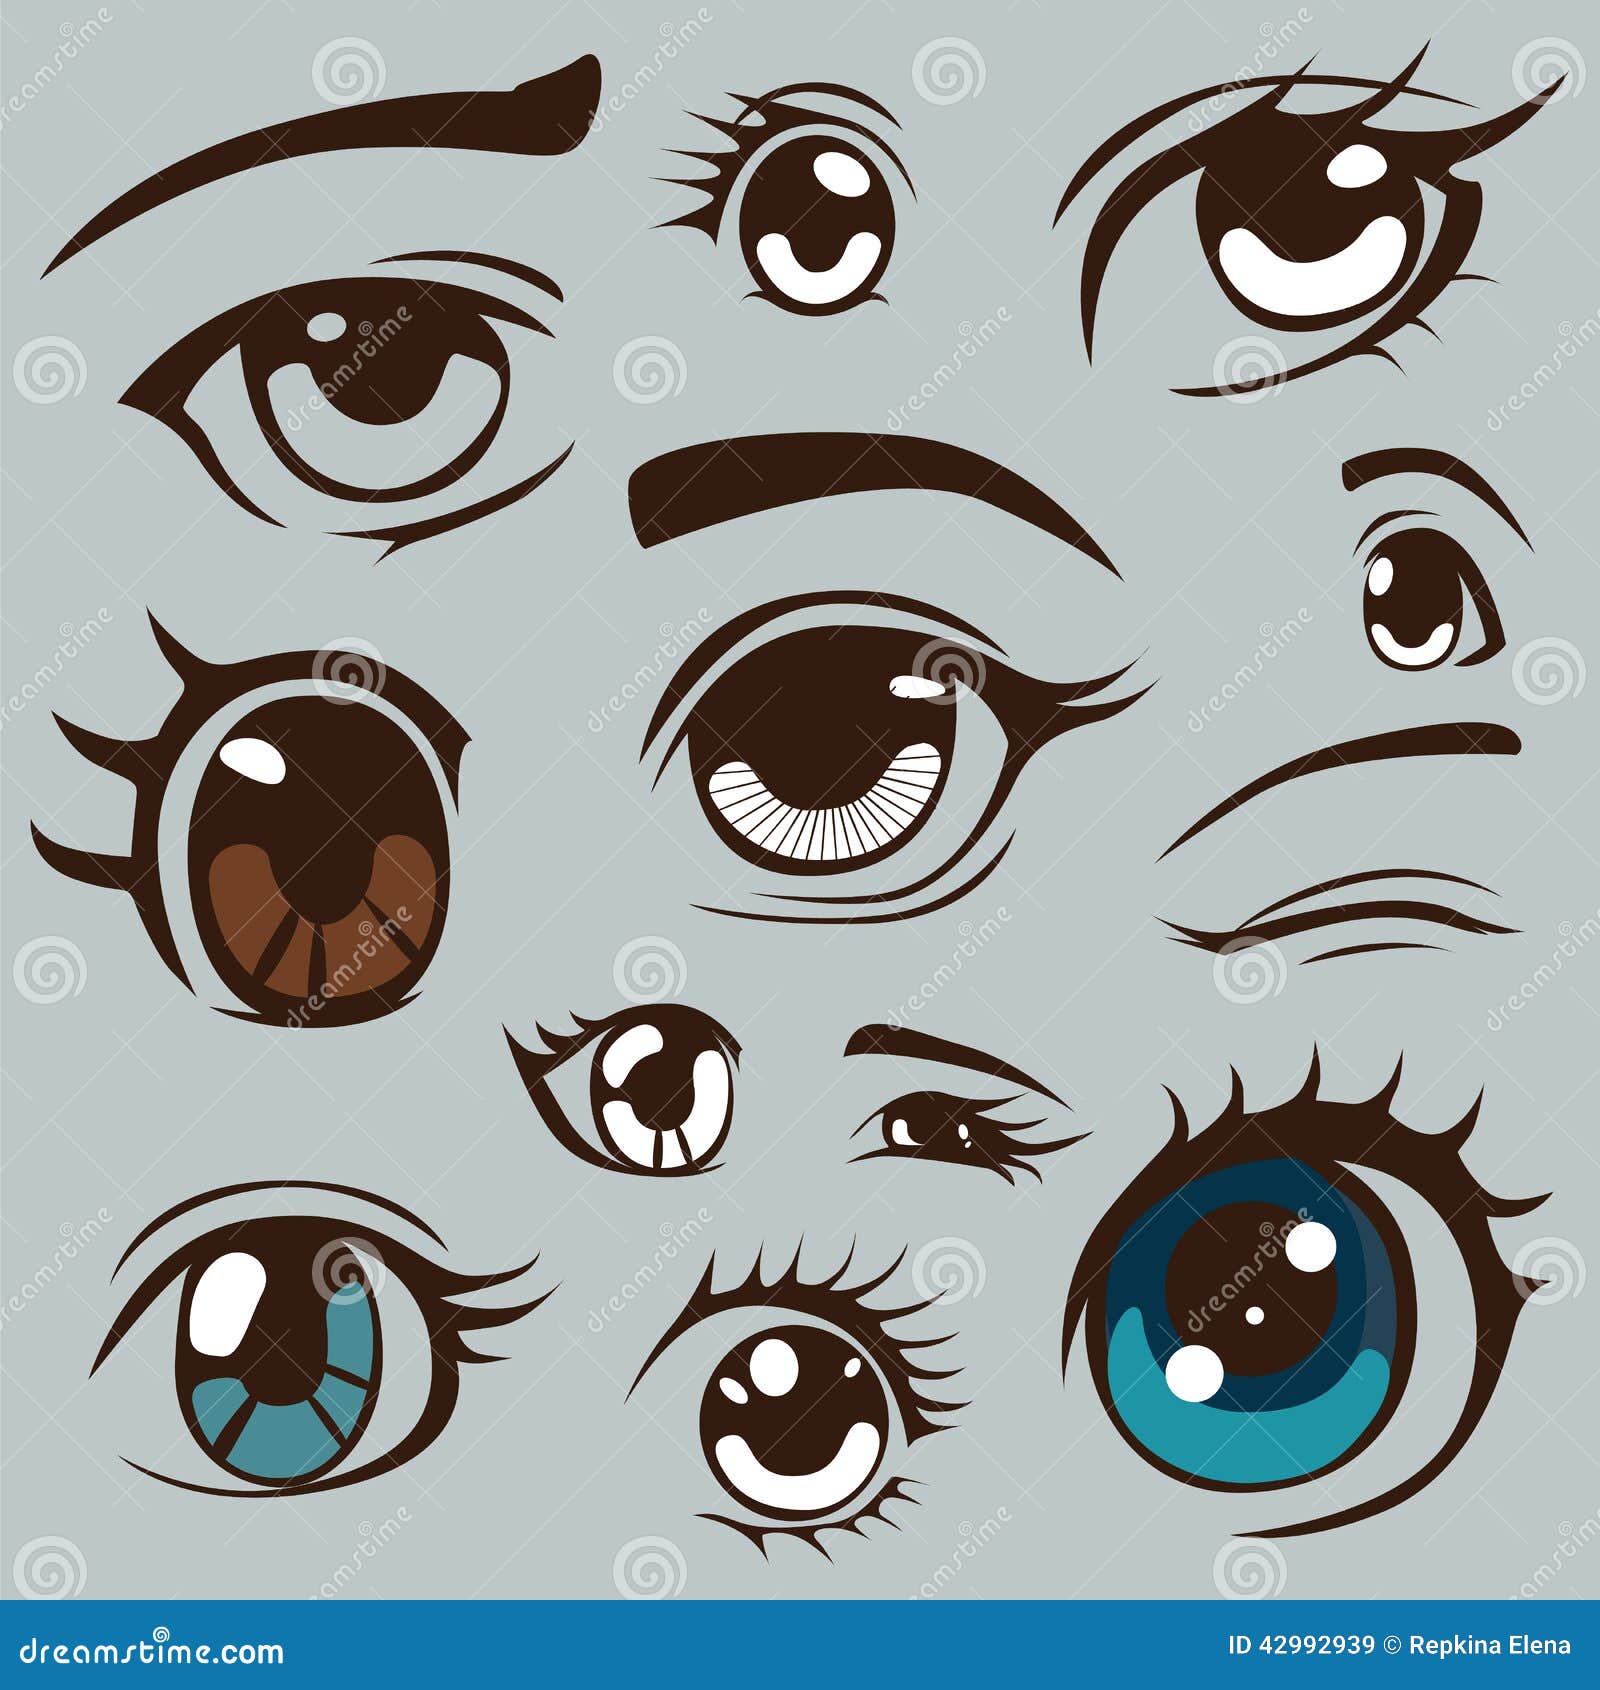 Set of different human and anime eyes cartoon Vector Image